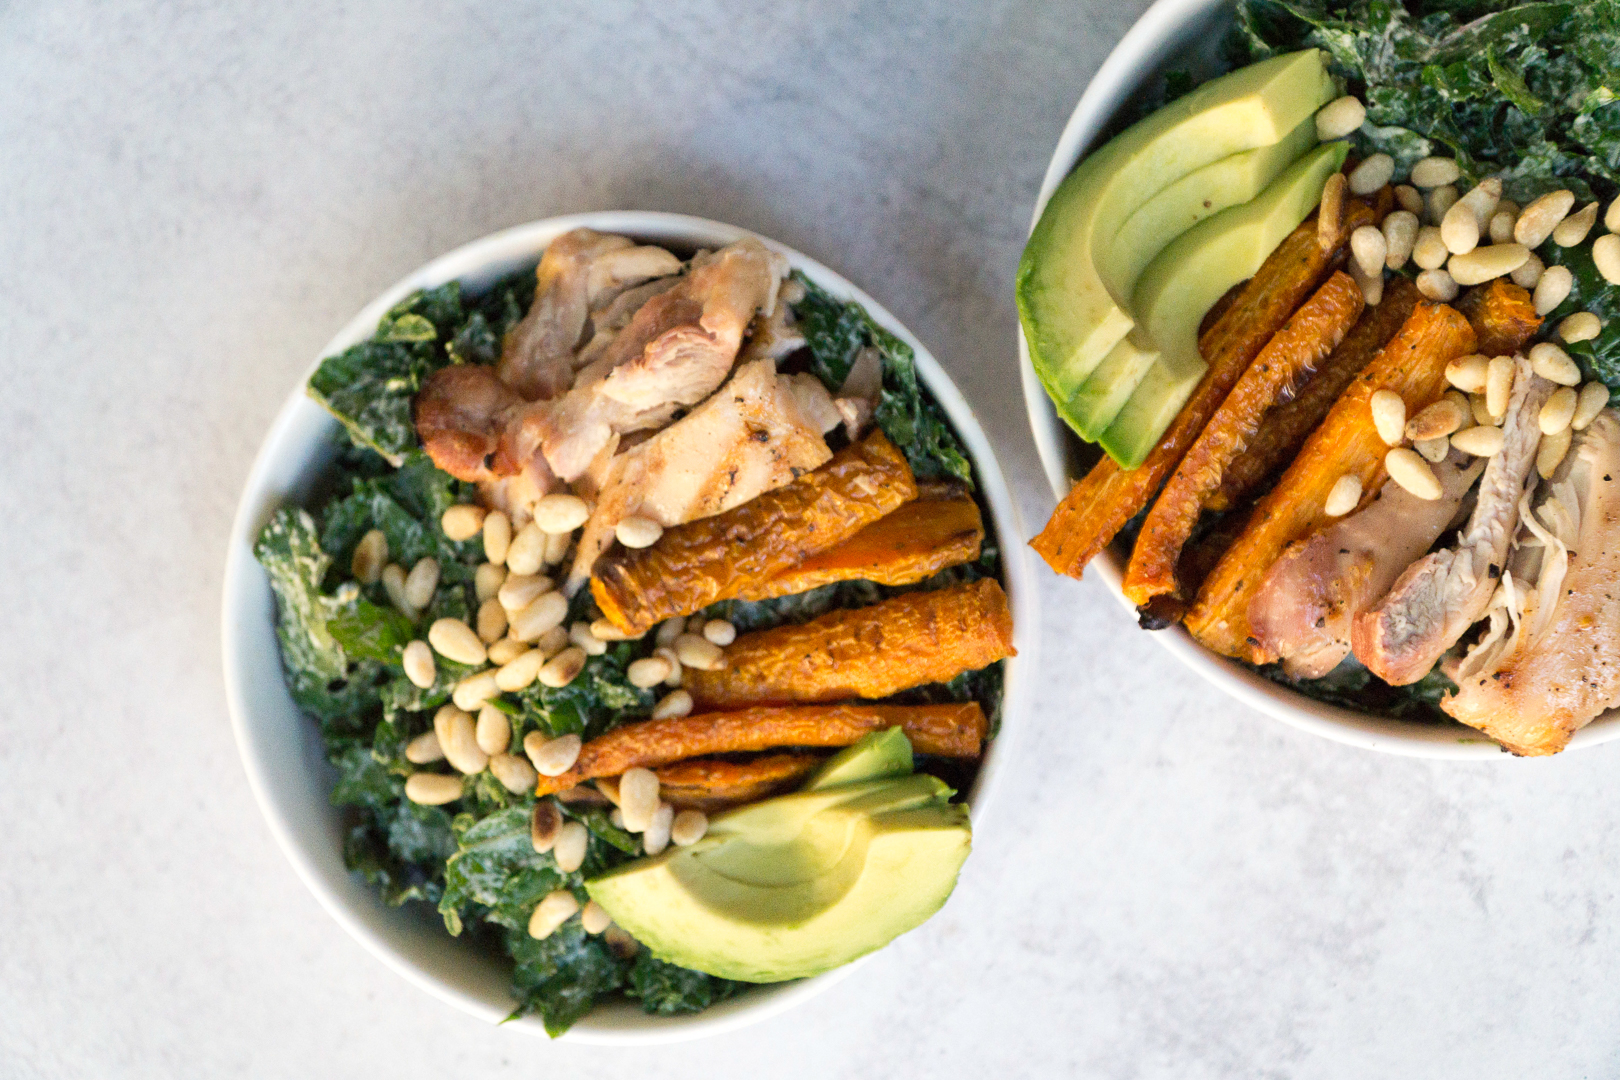 Superfood Kale Caesar salad with avo, chicken thighs, pine nuts, and creamy tahini cashew Caesar dressing